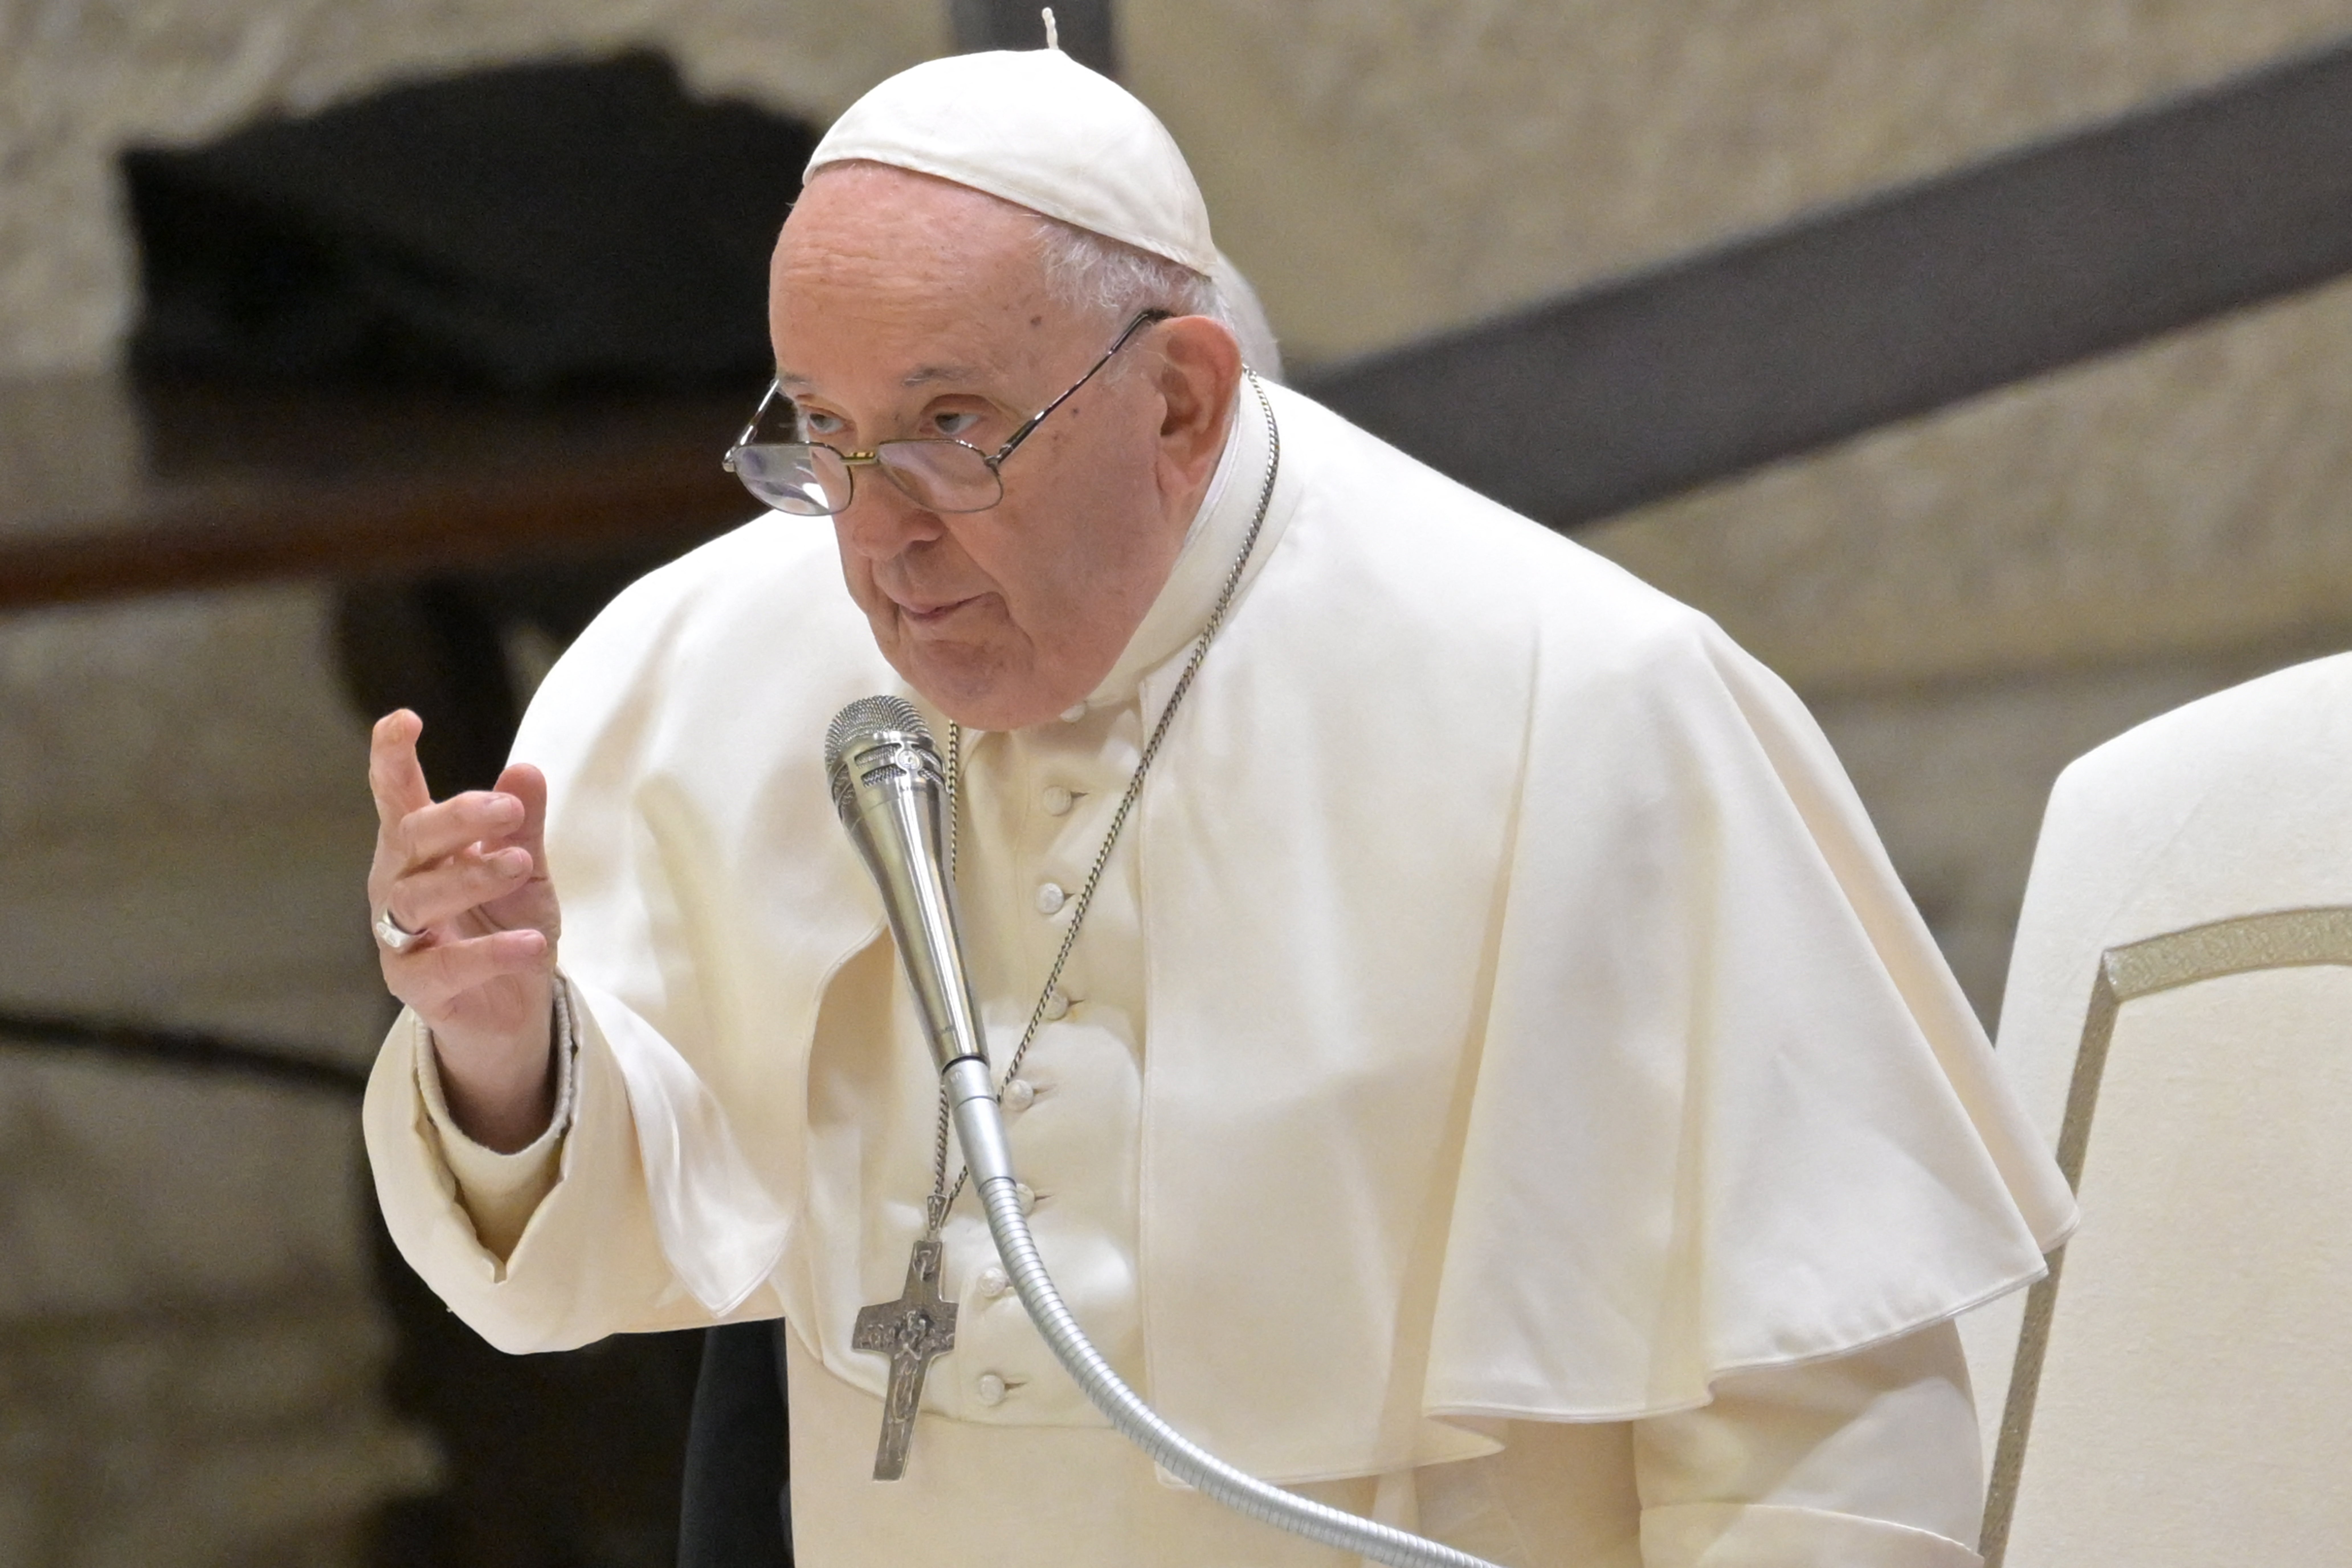 Pope Francis has approved the blessing of same-sex couples by priests